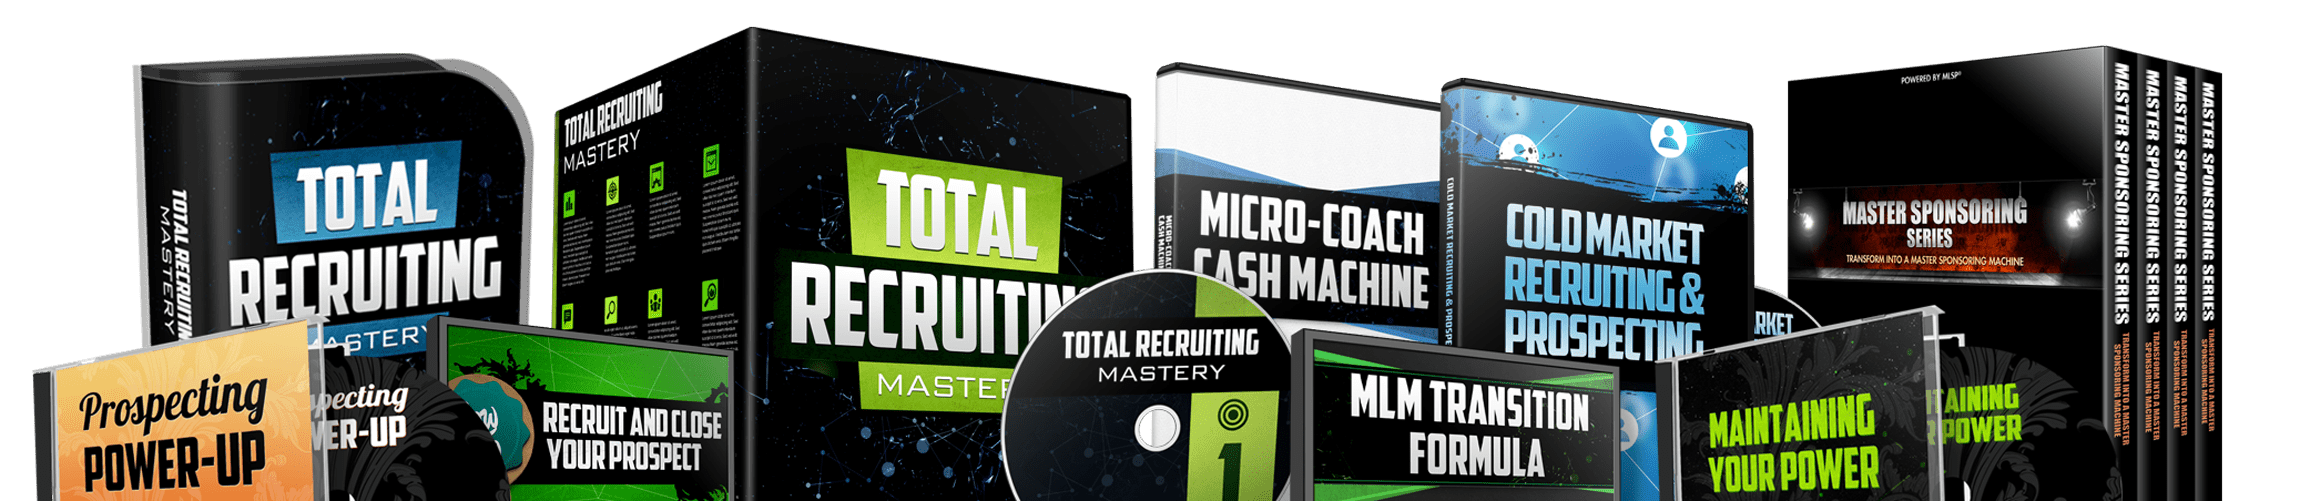 Total Recruiting Mastery